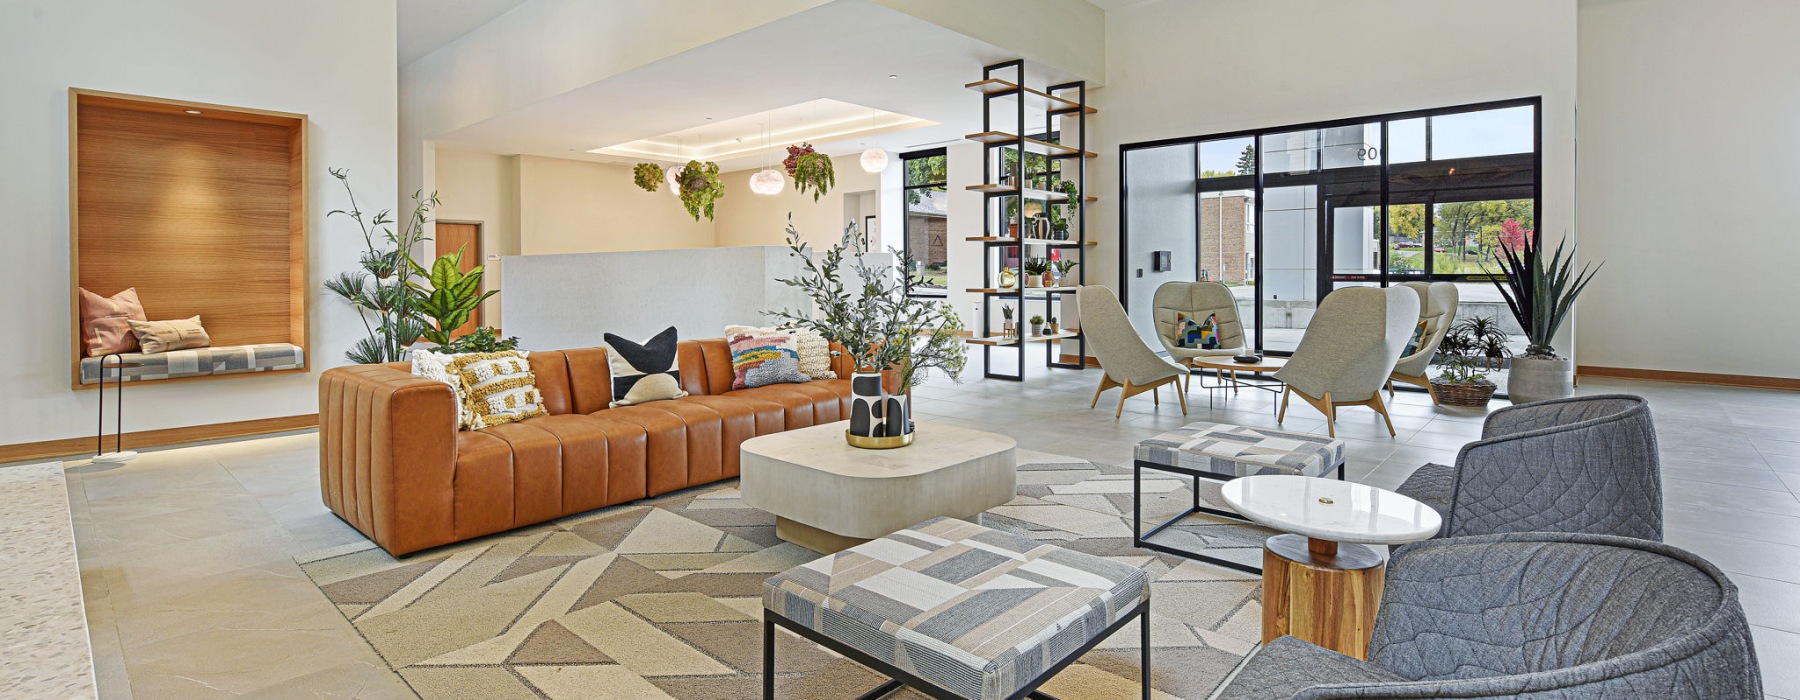 Community lounge area with modern furnishings